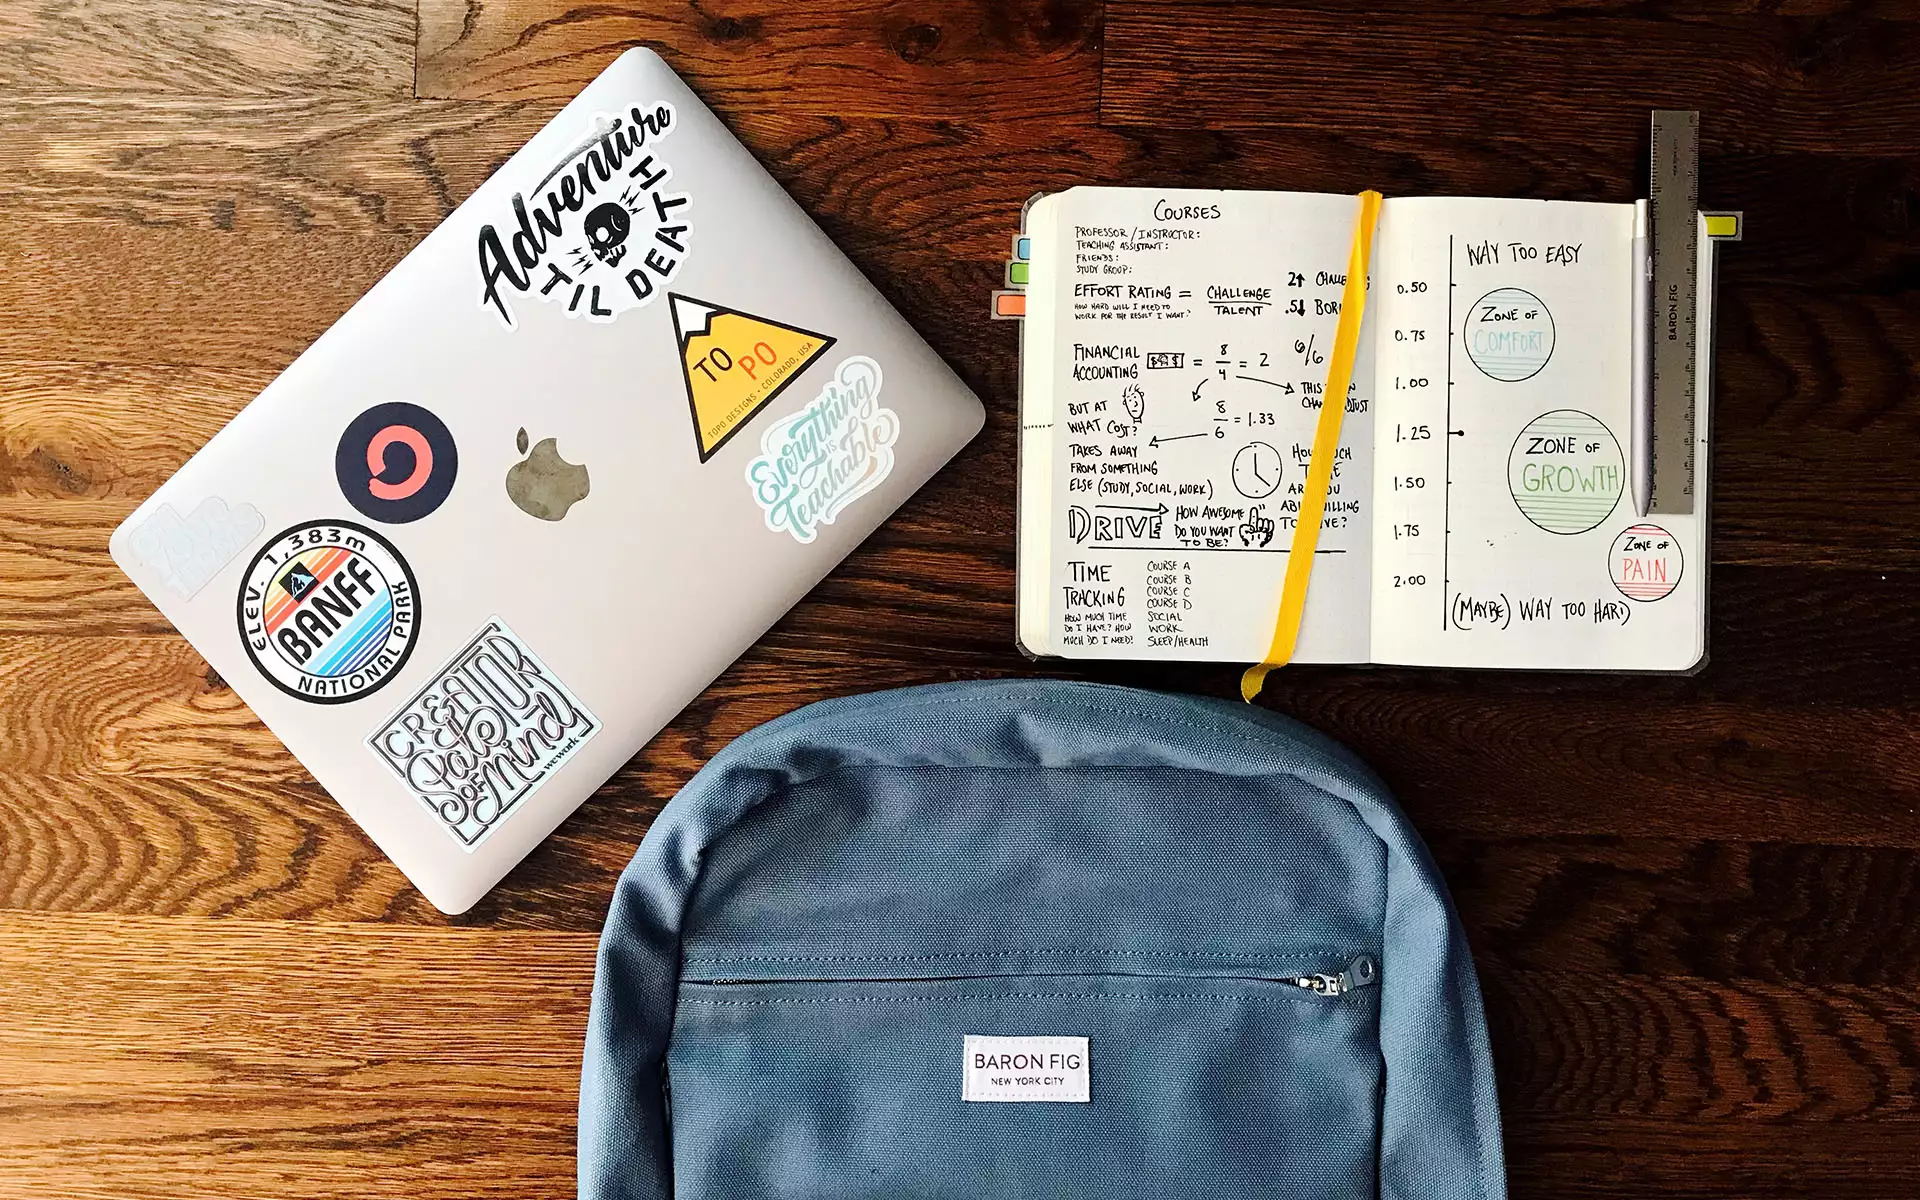 A laptop, a notebook and a backpack sitting on a wooden surface.